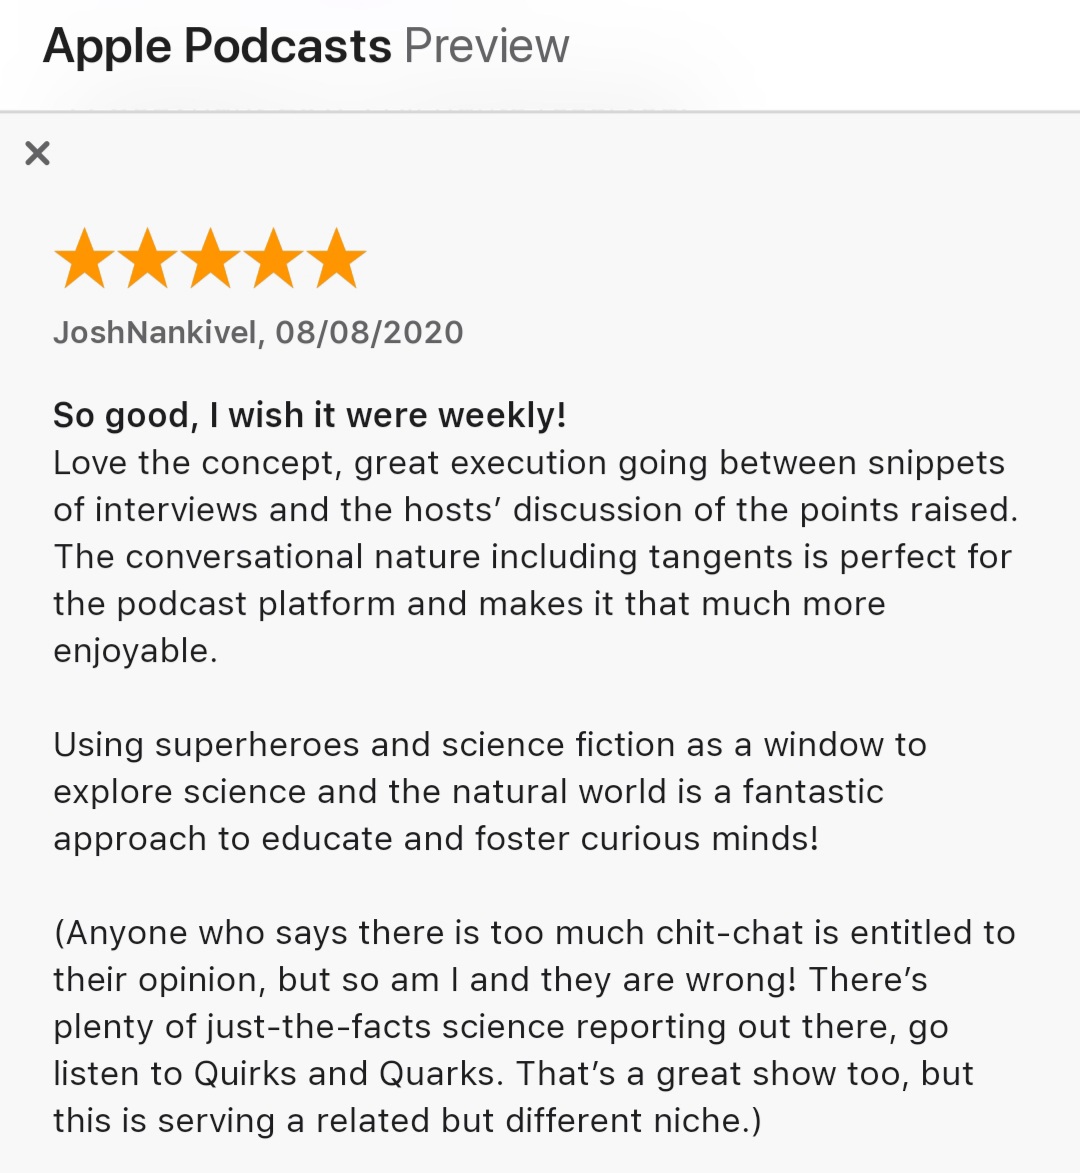 Just Chat on Apple Podcasts